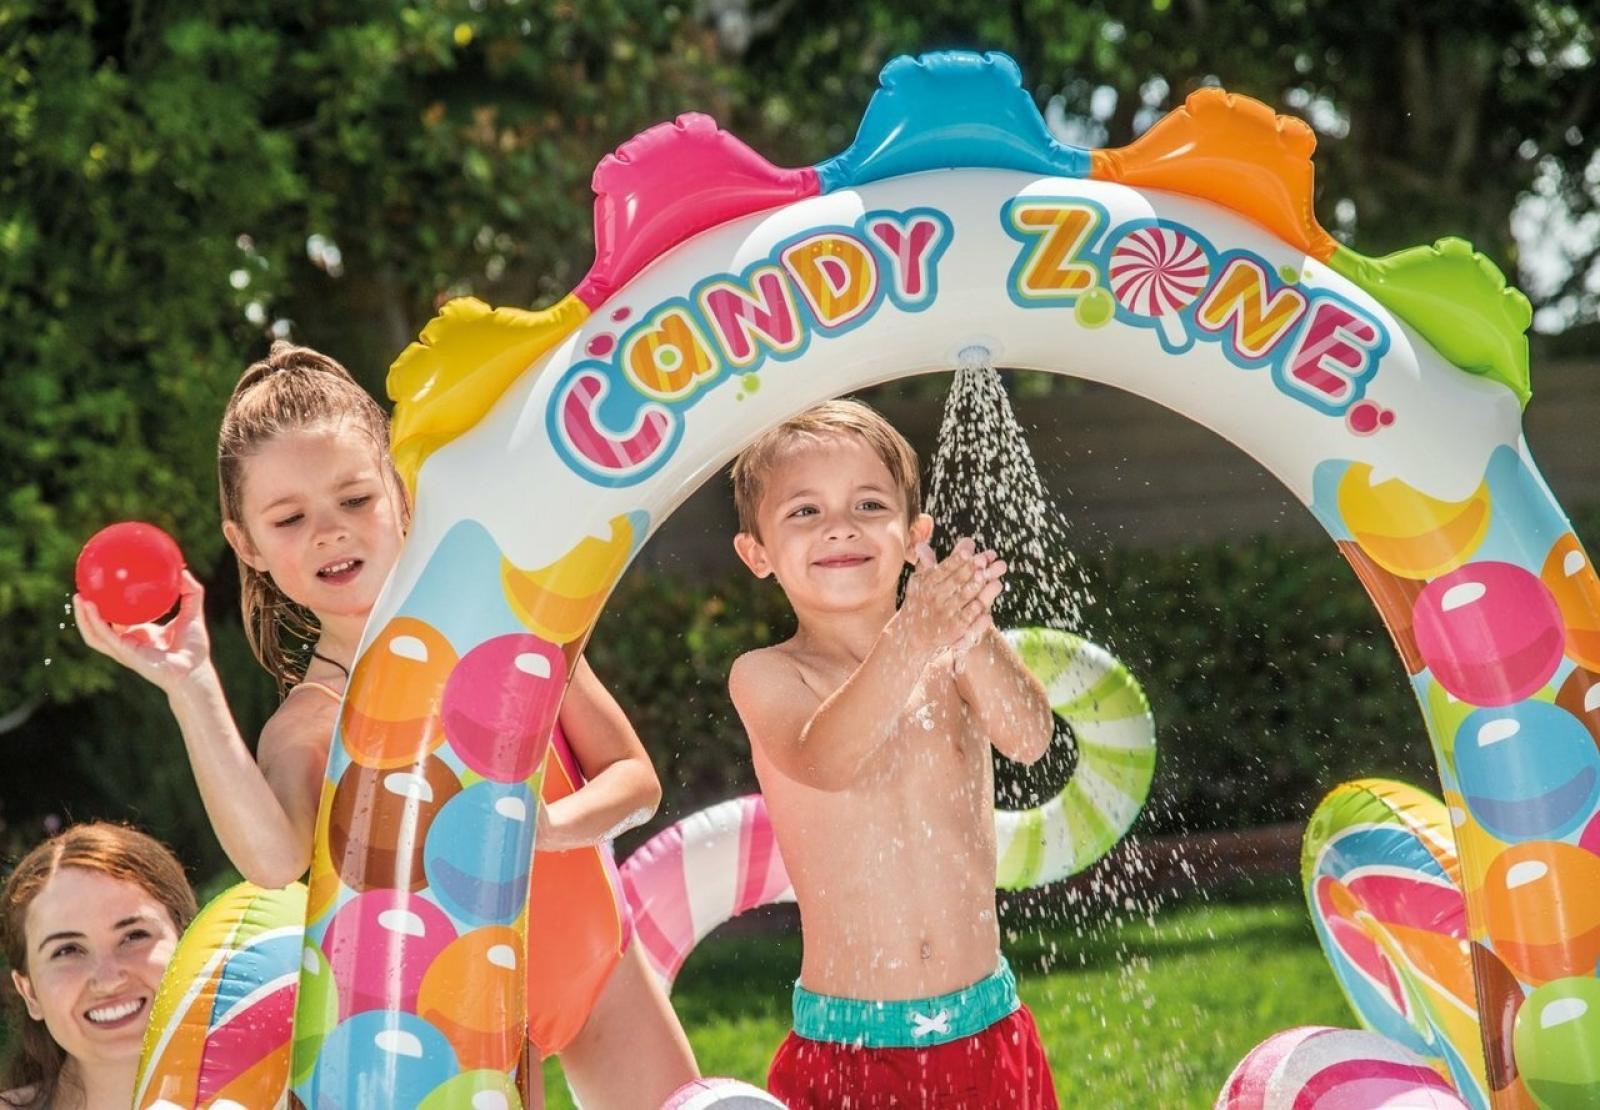 Intex Candy Zone Inflatable Play Center With Slide